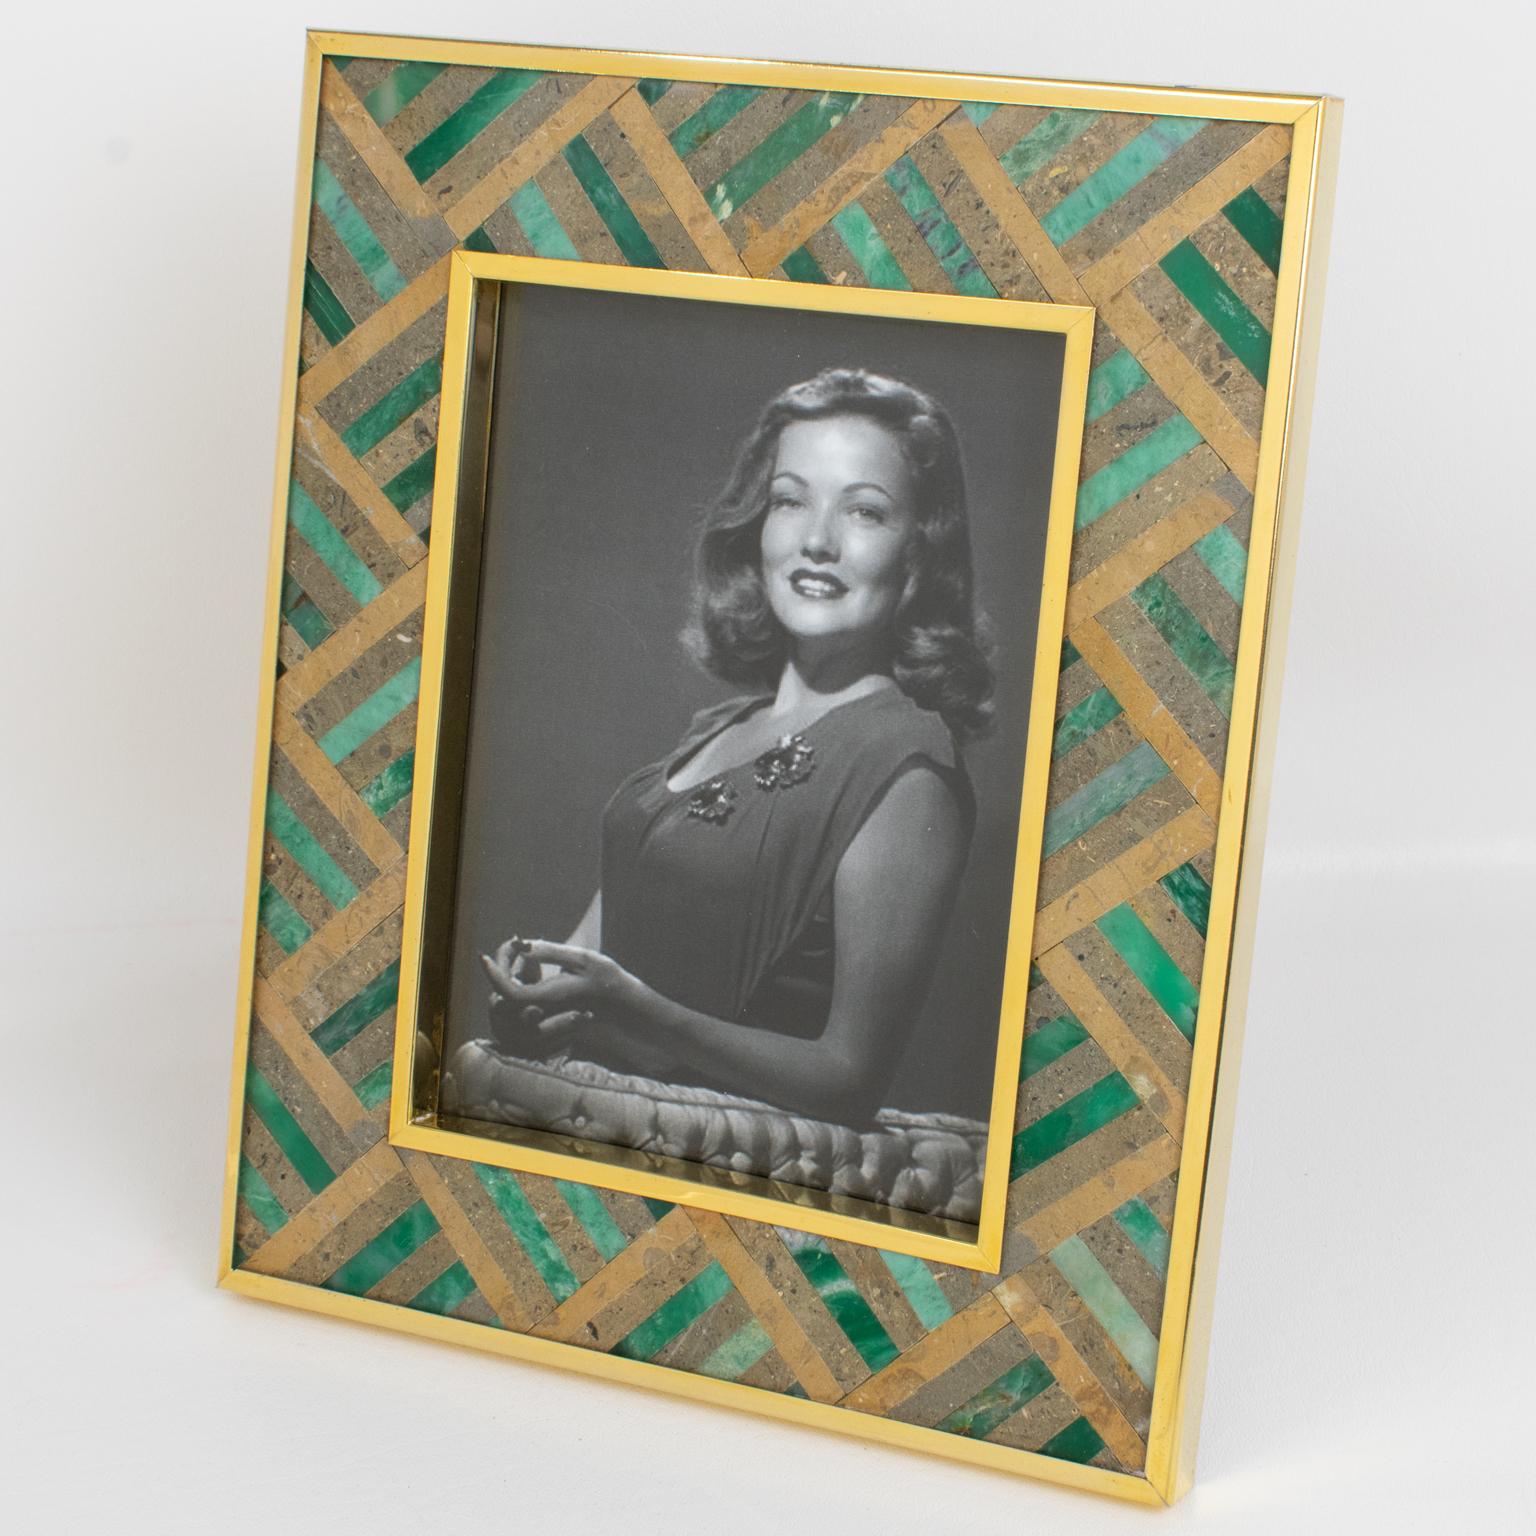 This elegant gilded brass and stone picture photo frame was designed by Italian designer Rita Frascione, Firenze, in the 1980s. The piece features a gilded metal framing with stone marquetry inlaid. The hard gemstones building the marquetry are